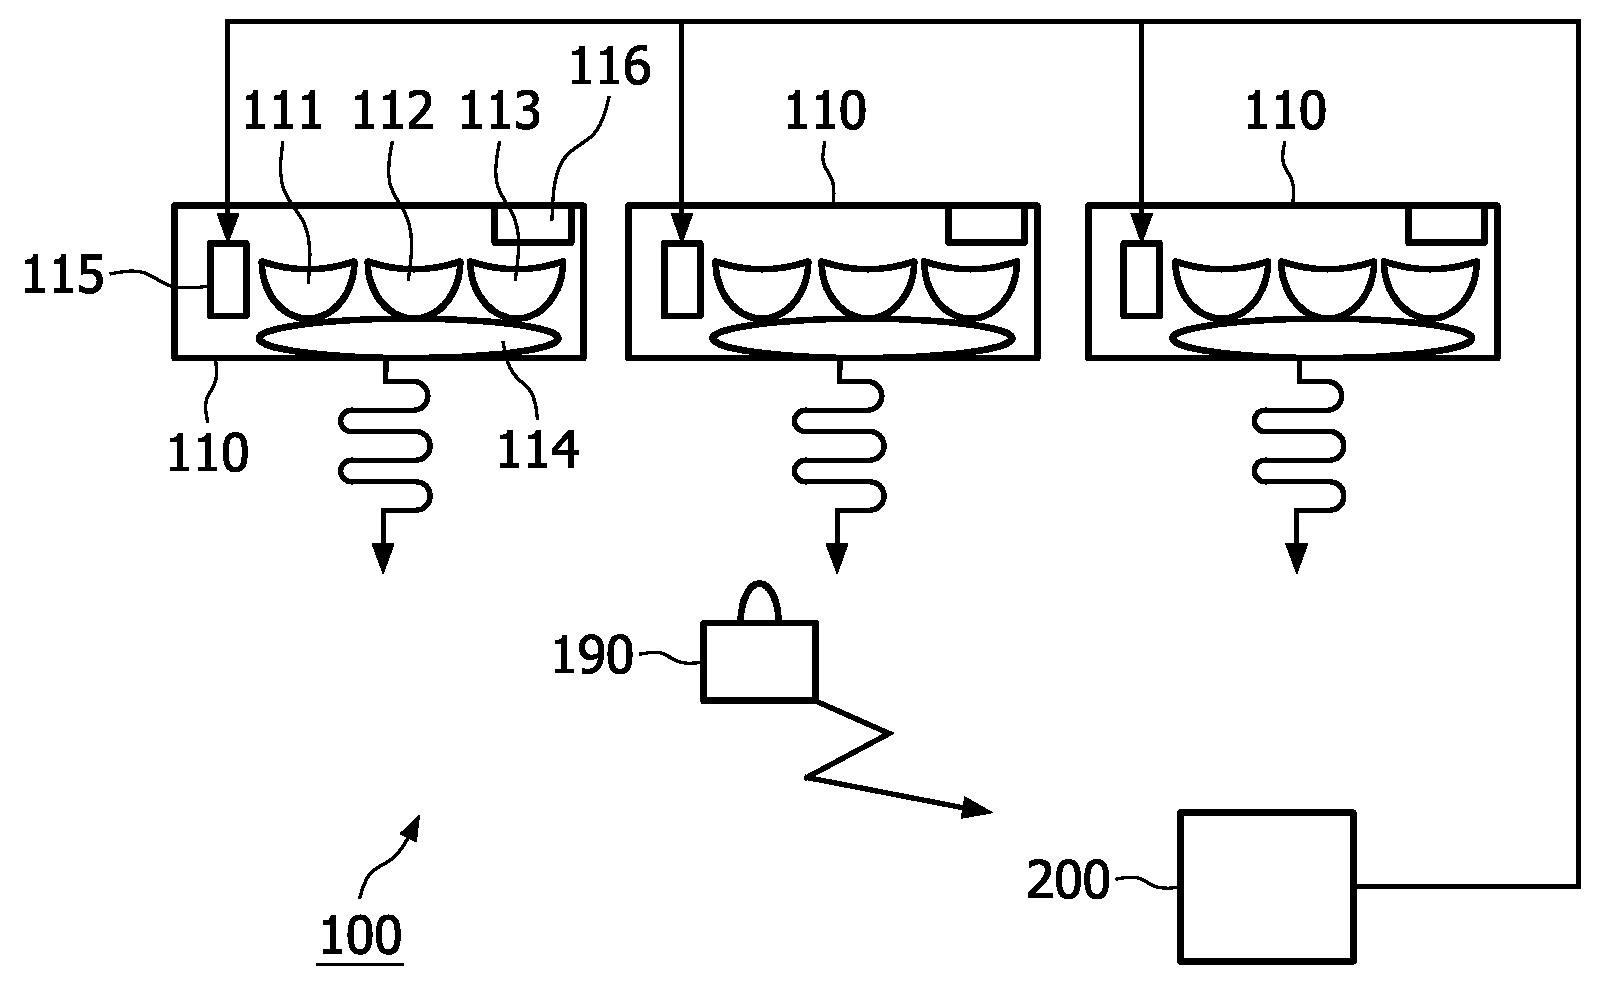 Light module, illumination system and method incorporating data in light emitted